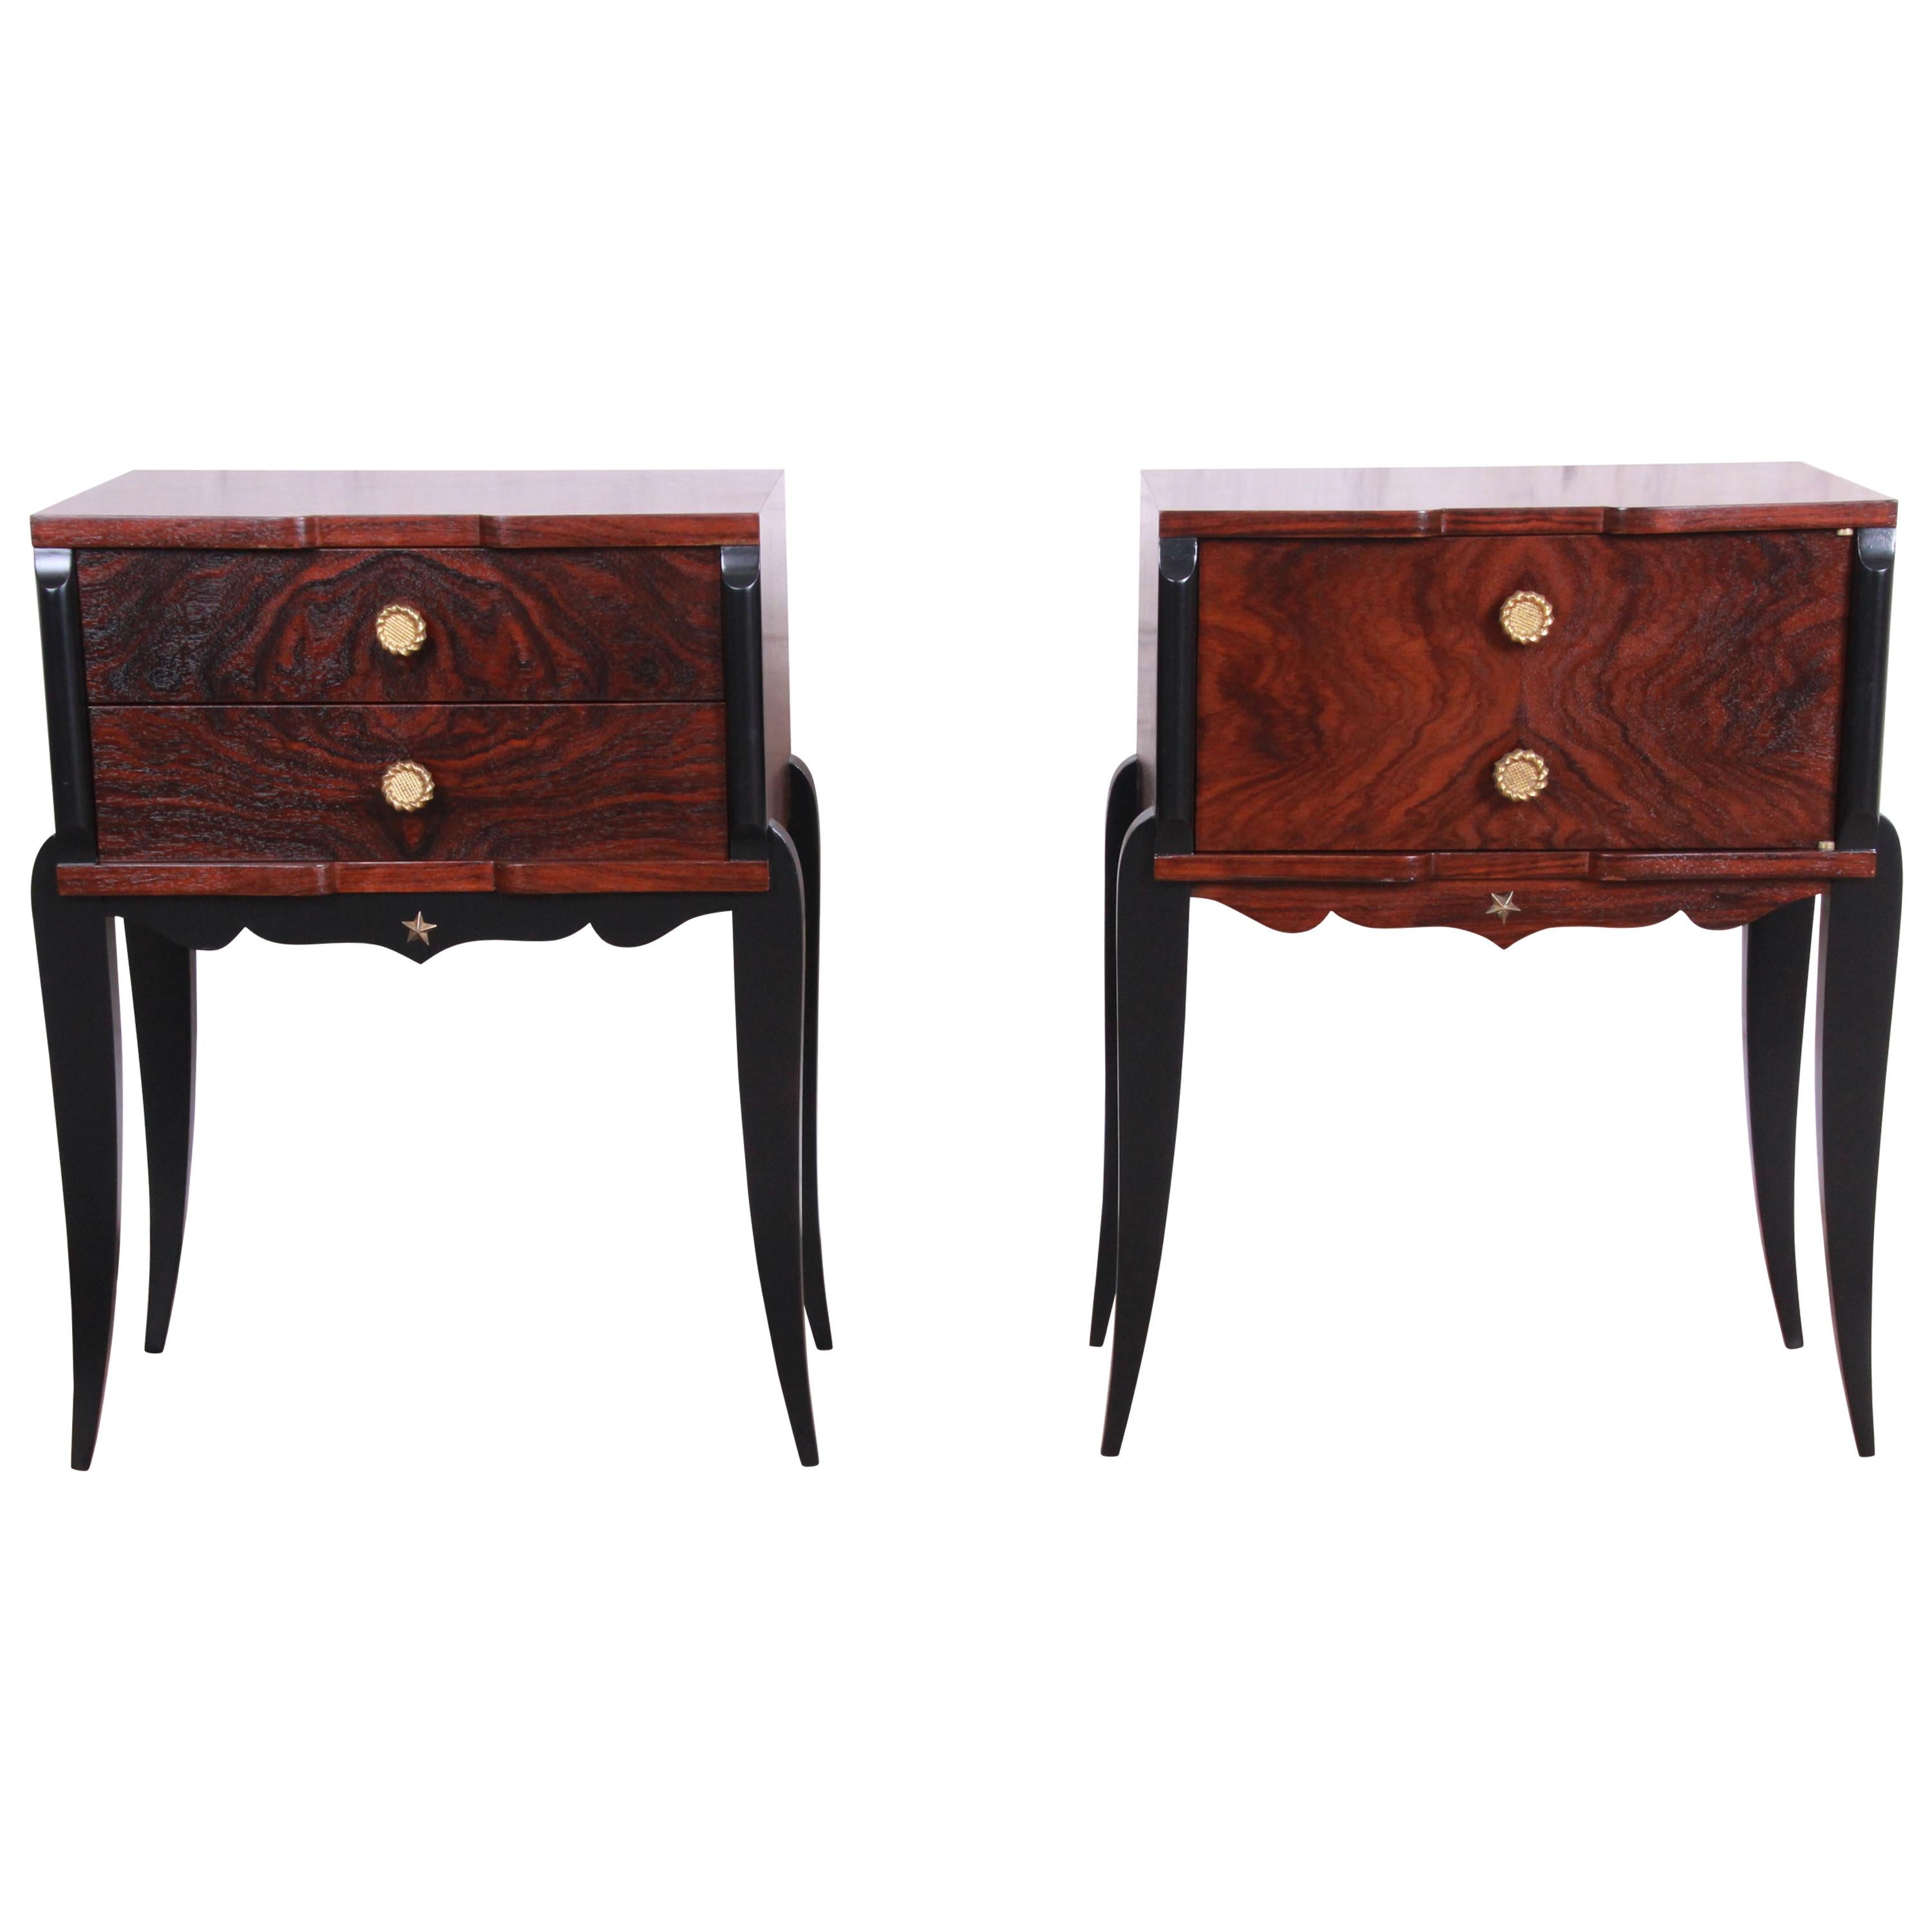 French Art Deco Rosewood Nightstands circa 1930s, Newly Restored